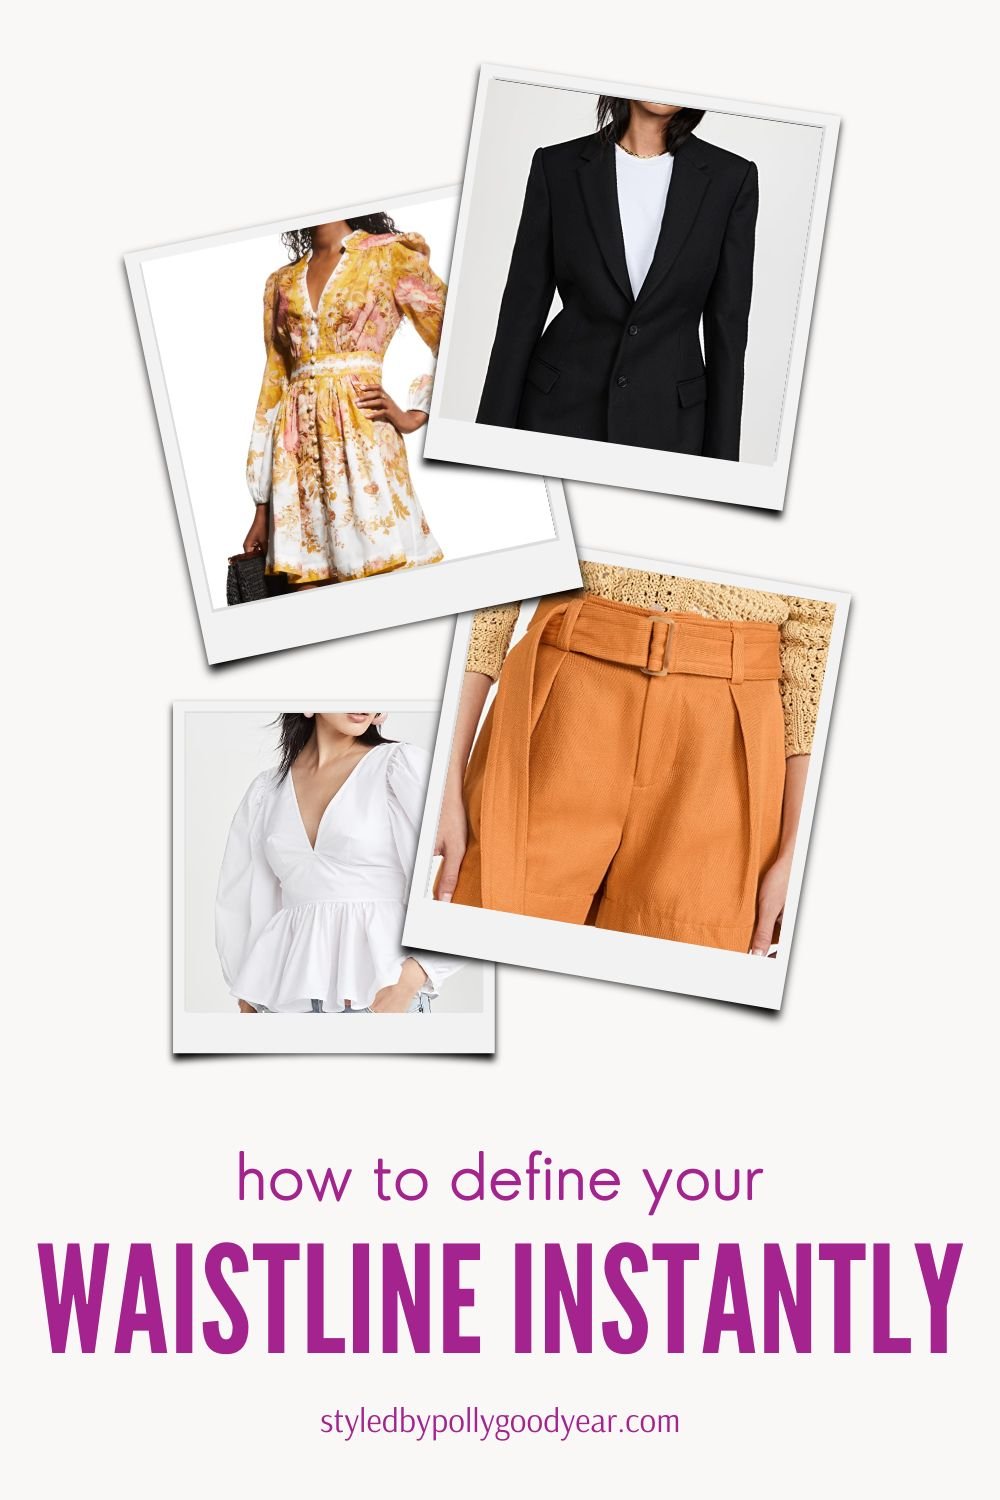 5 Ways To Style A Belt And My Best Secrets For A Slim Looking Waist!